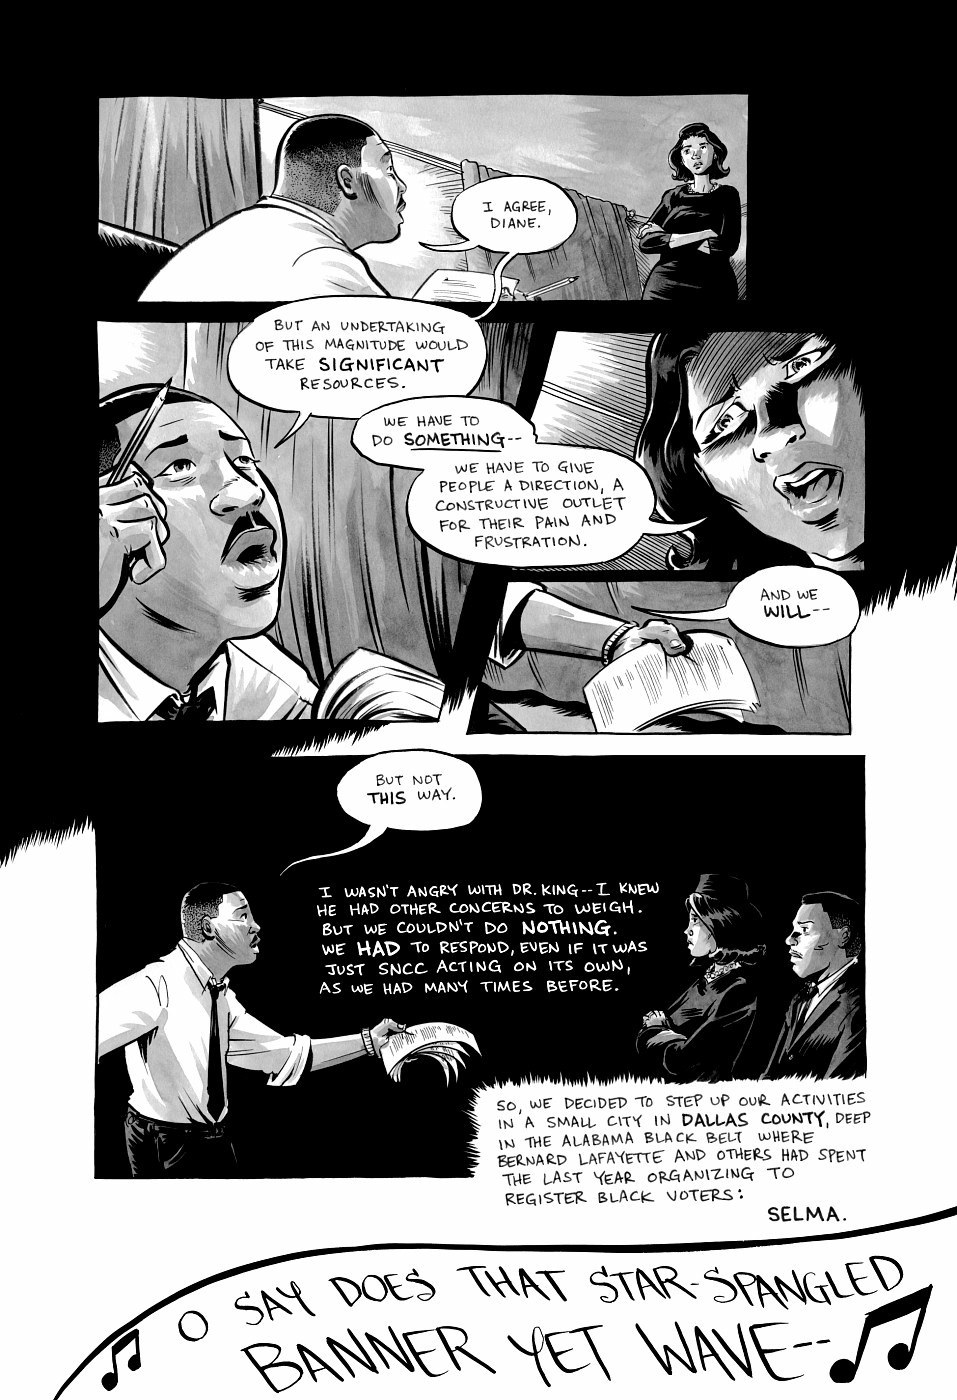 page 20 of march book three graphic novel